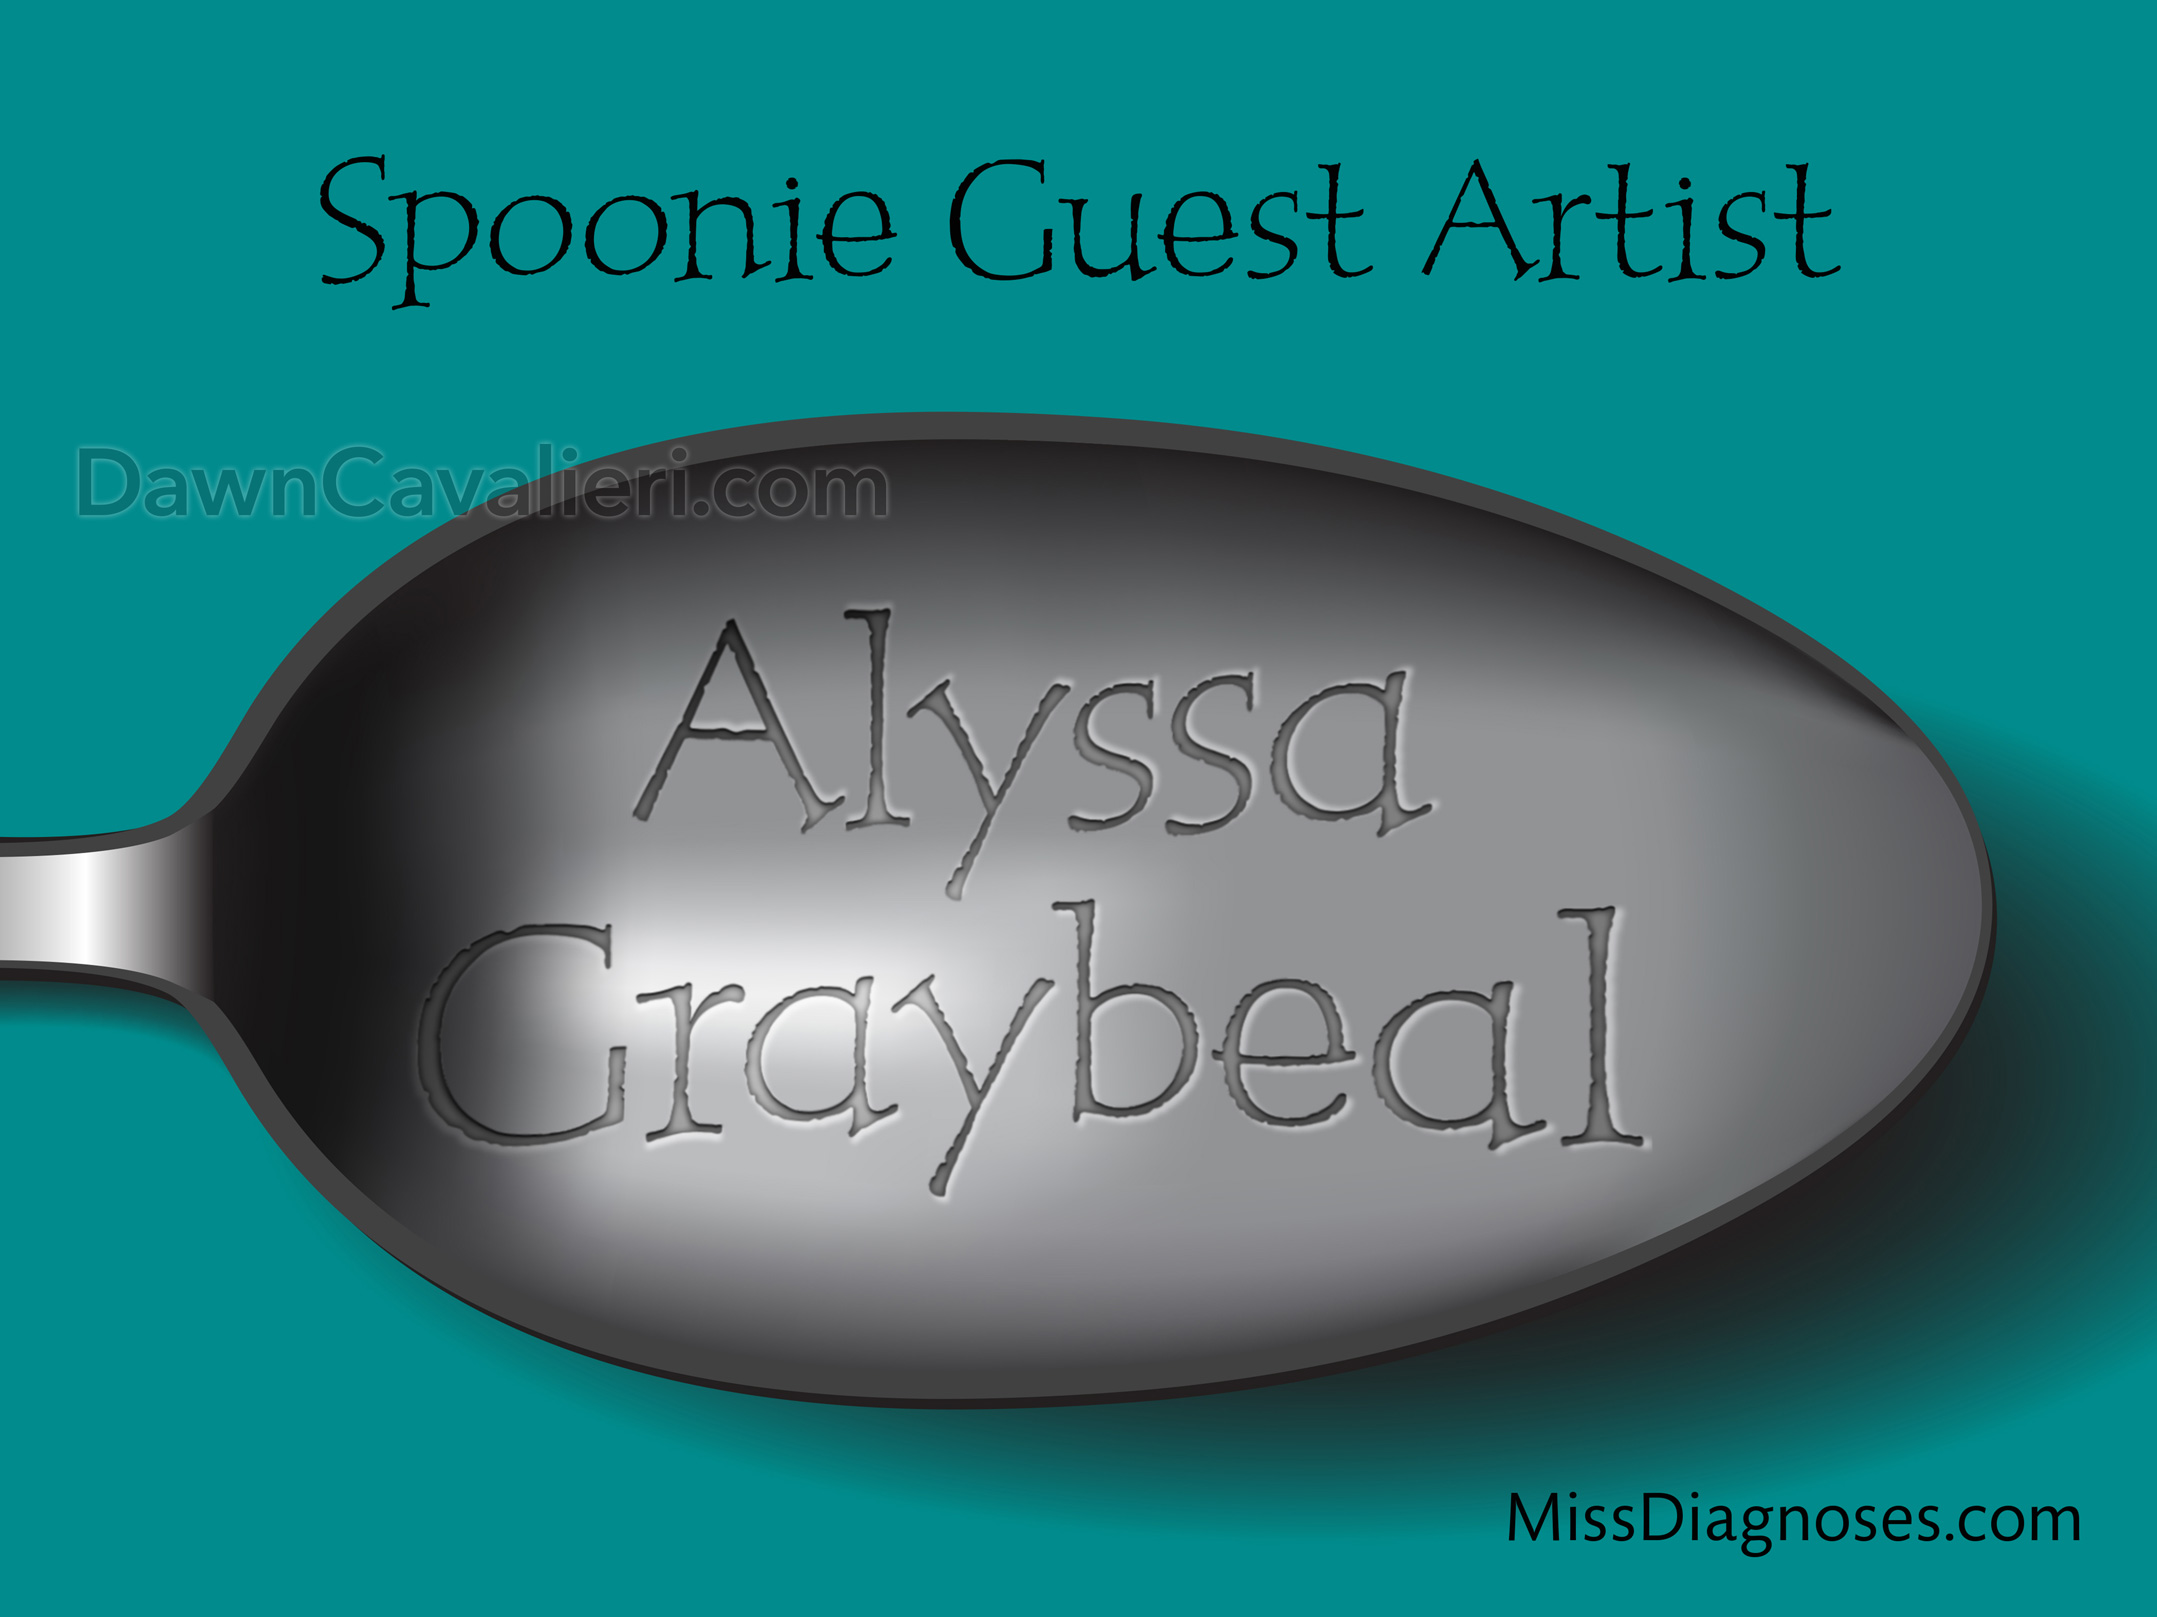 Header image for blog post. The top reads 'Spoonie Guest Artist.' The illustration is of the bowl part of a spoon in silver tones. Running across the bowl, styled to look like engraved type, is the name Alyssa Graybeal. In the lower right corner of the image is the name of the blog: Miss Diagnoses dot com. The background is teal. The ratio of the image is roughly 1.3 to 1.